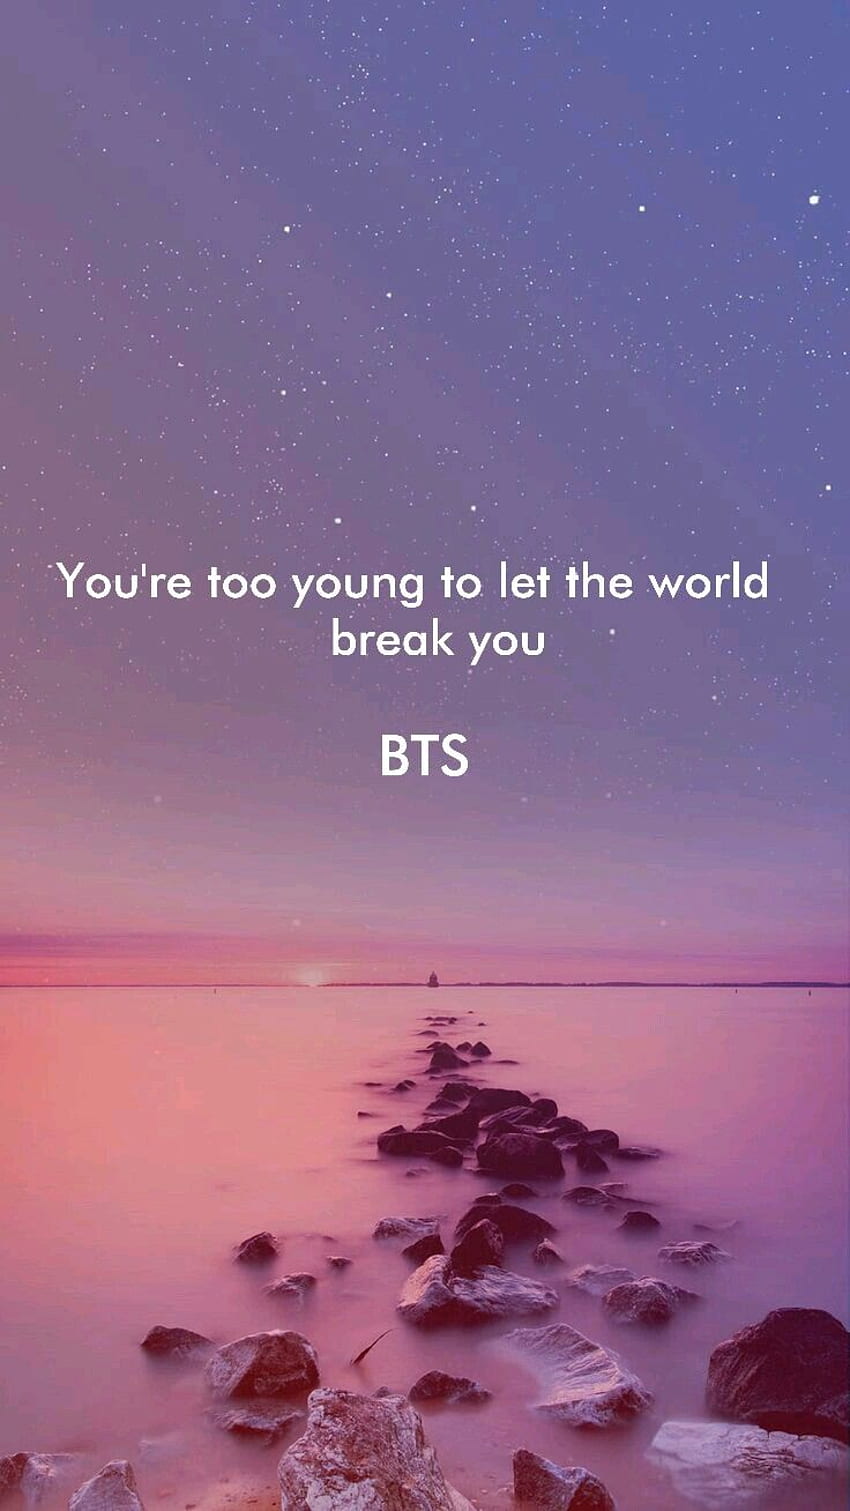 Bts quotes Wallpapers Download | MobCup